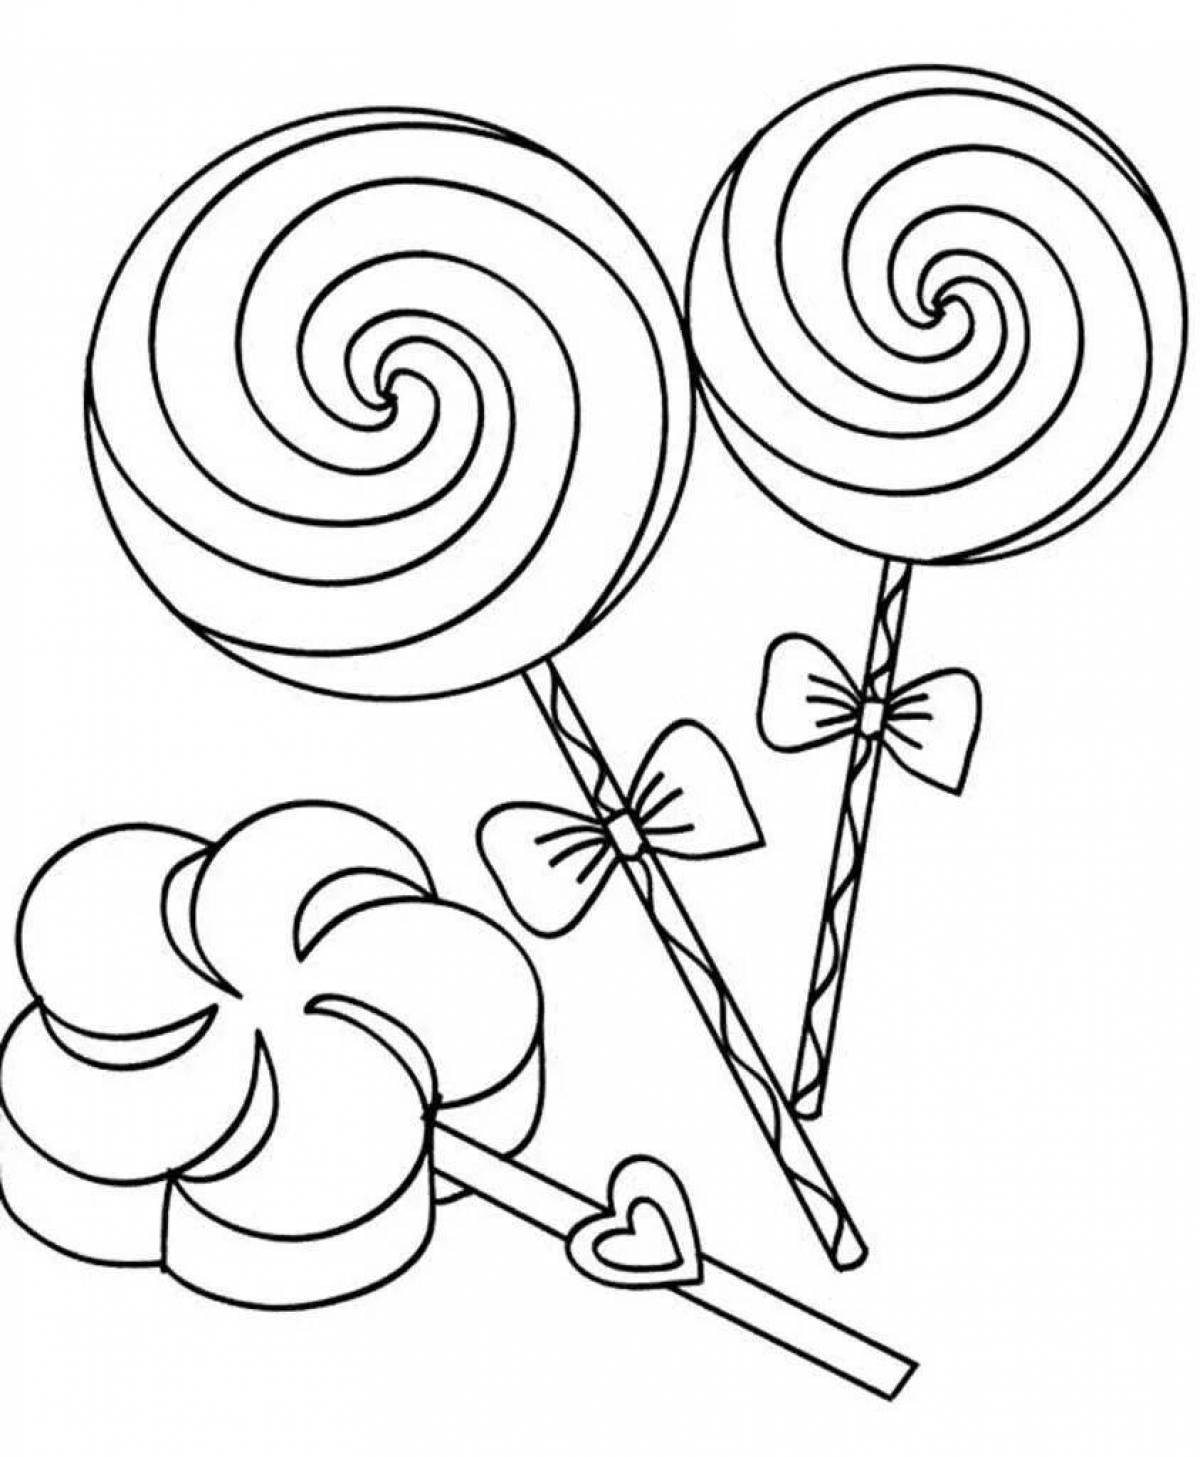 Amazing candy coloring pages for 2-3 year olds